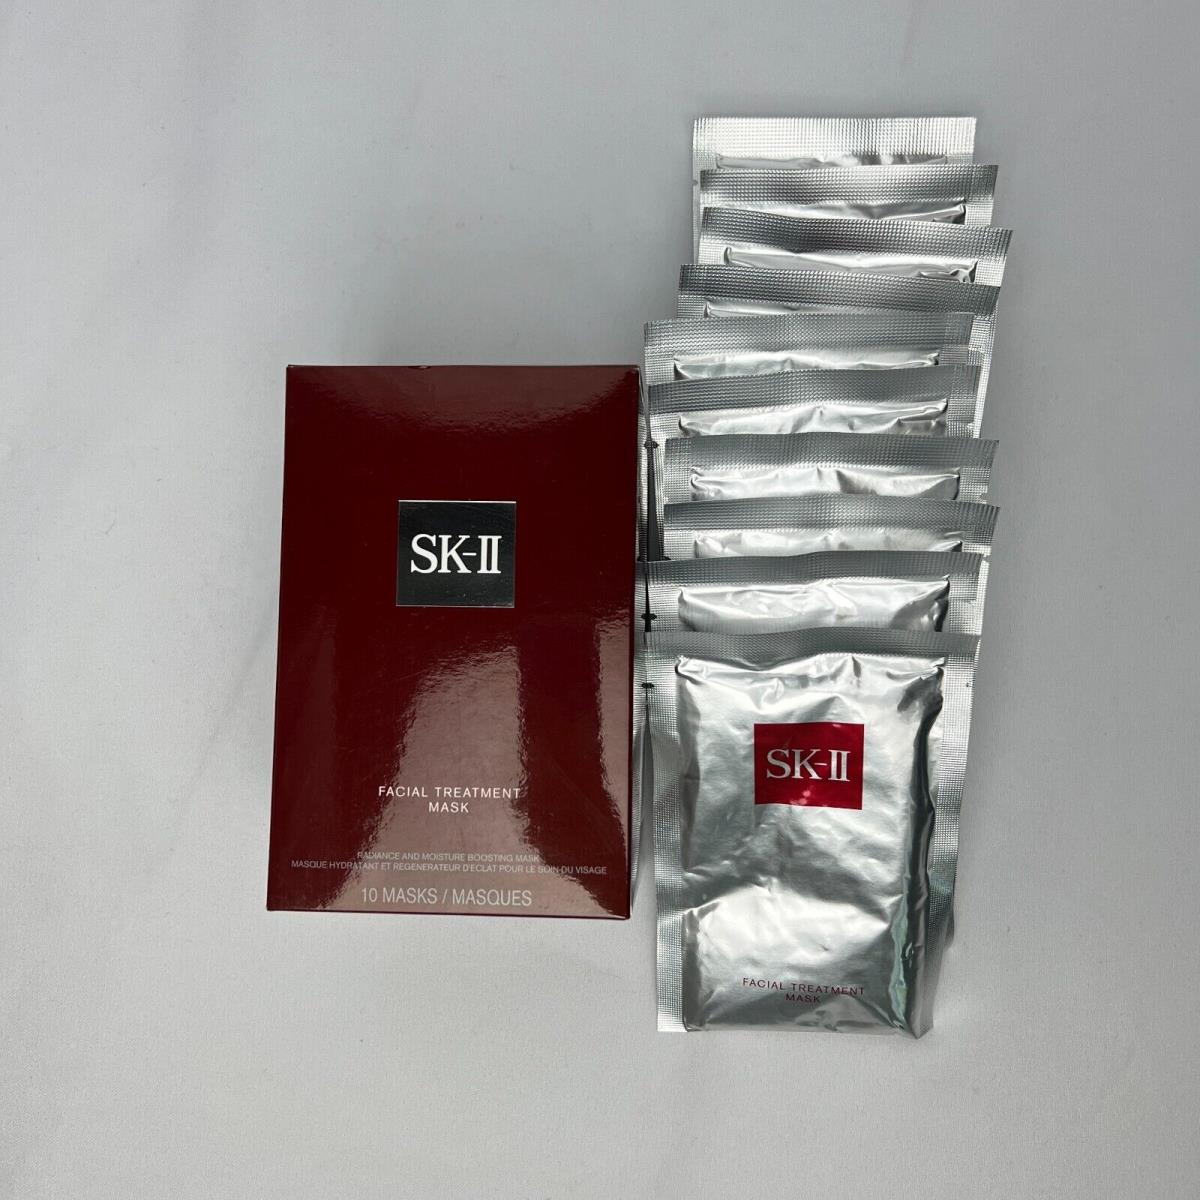 Sk-ii Facial Treatment Mask - Pack of 10